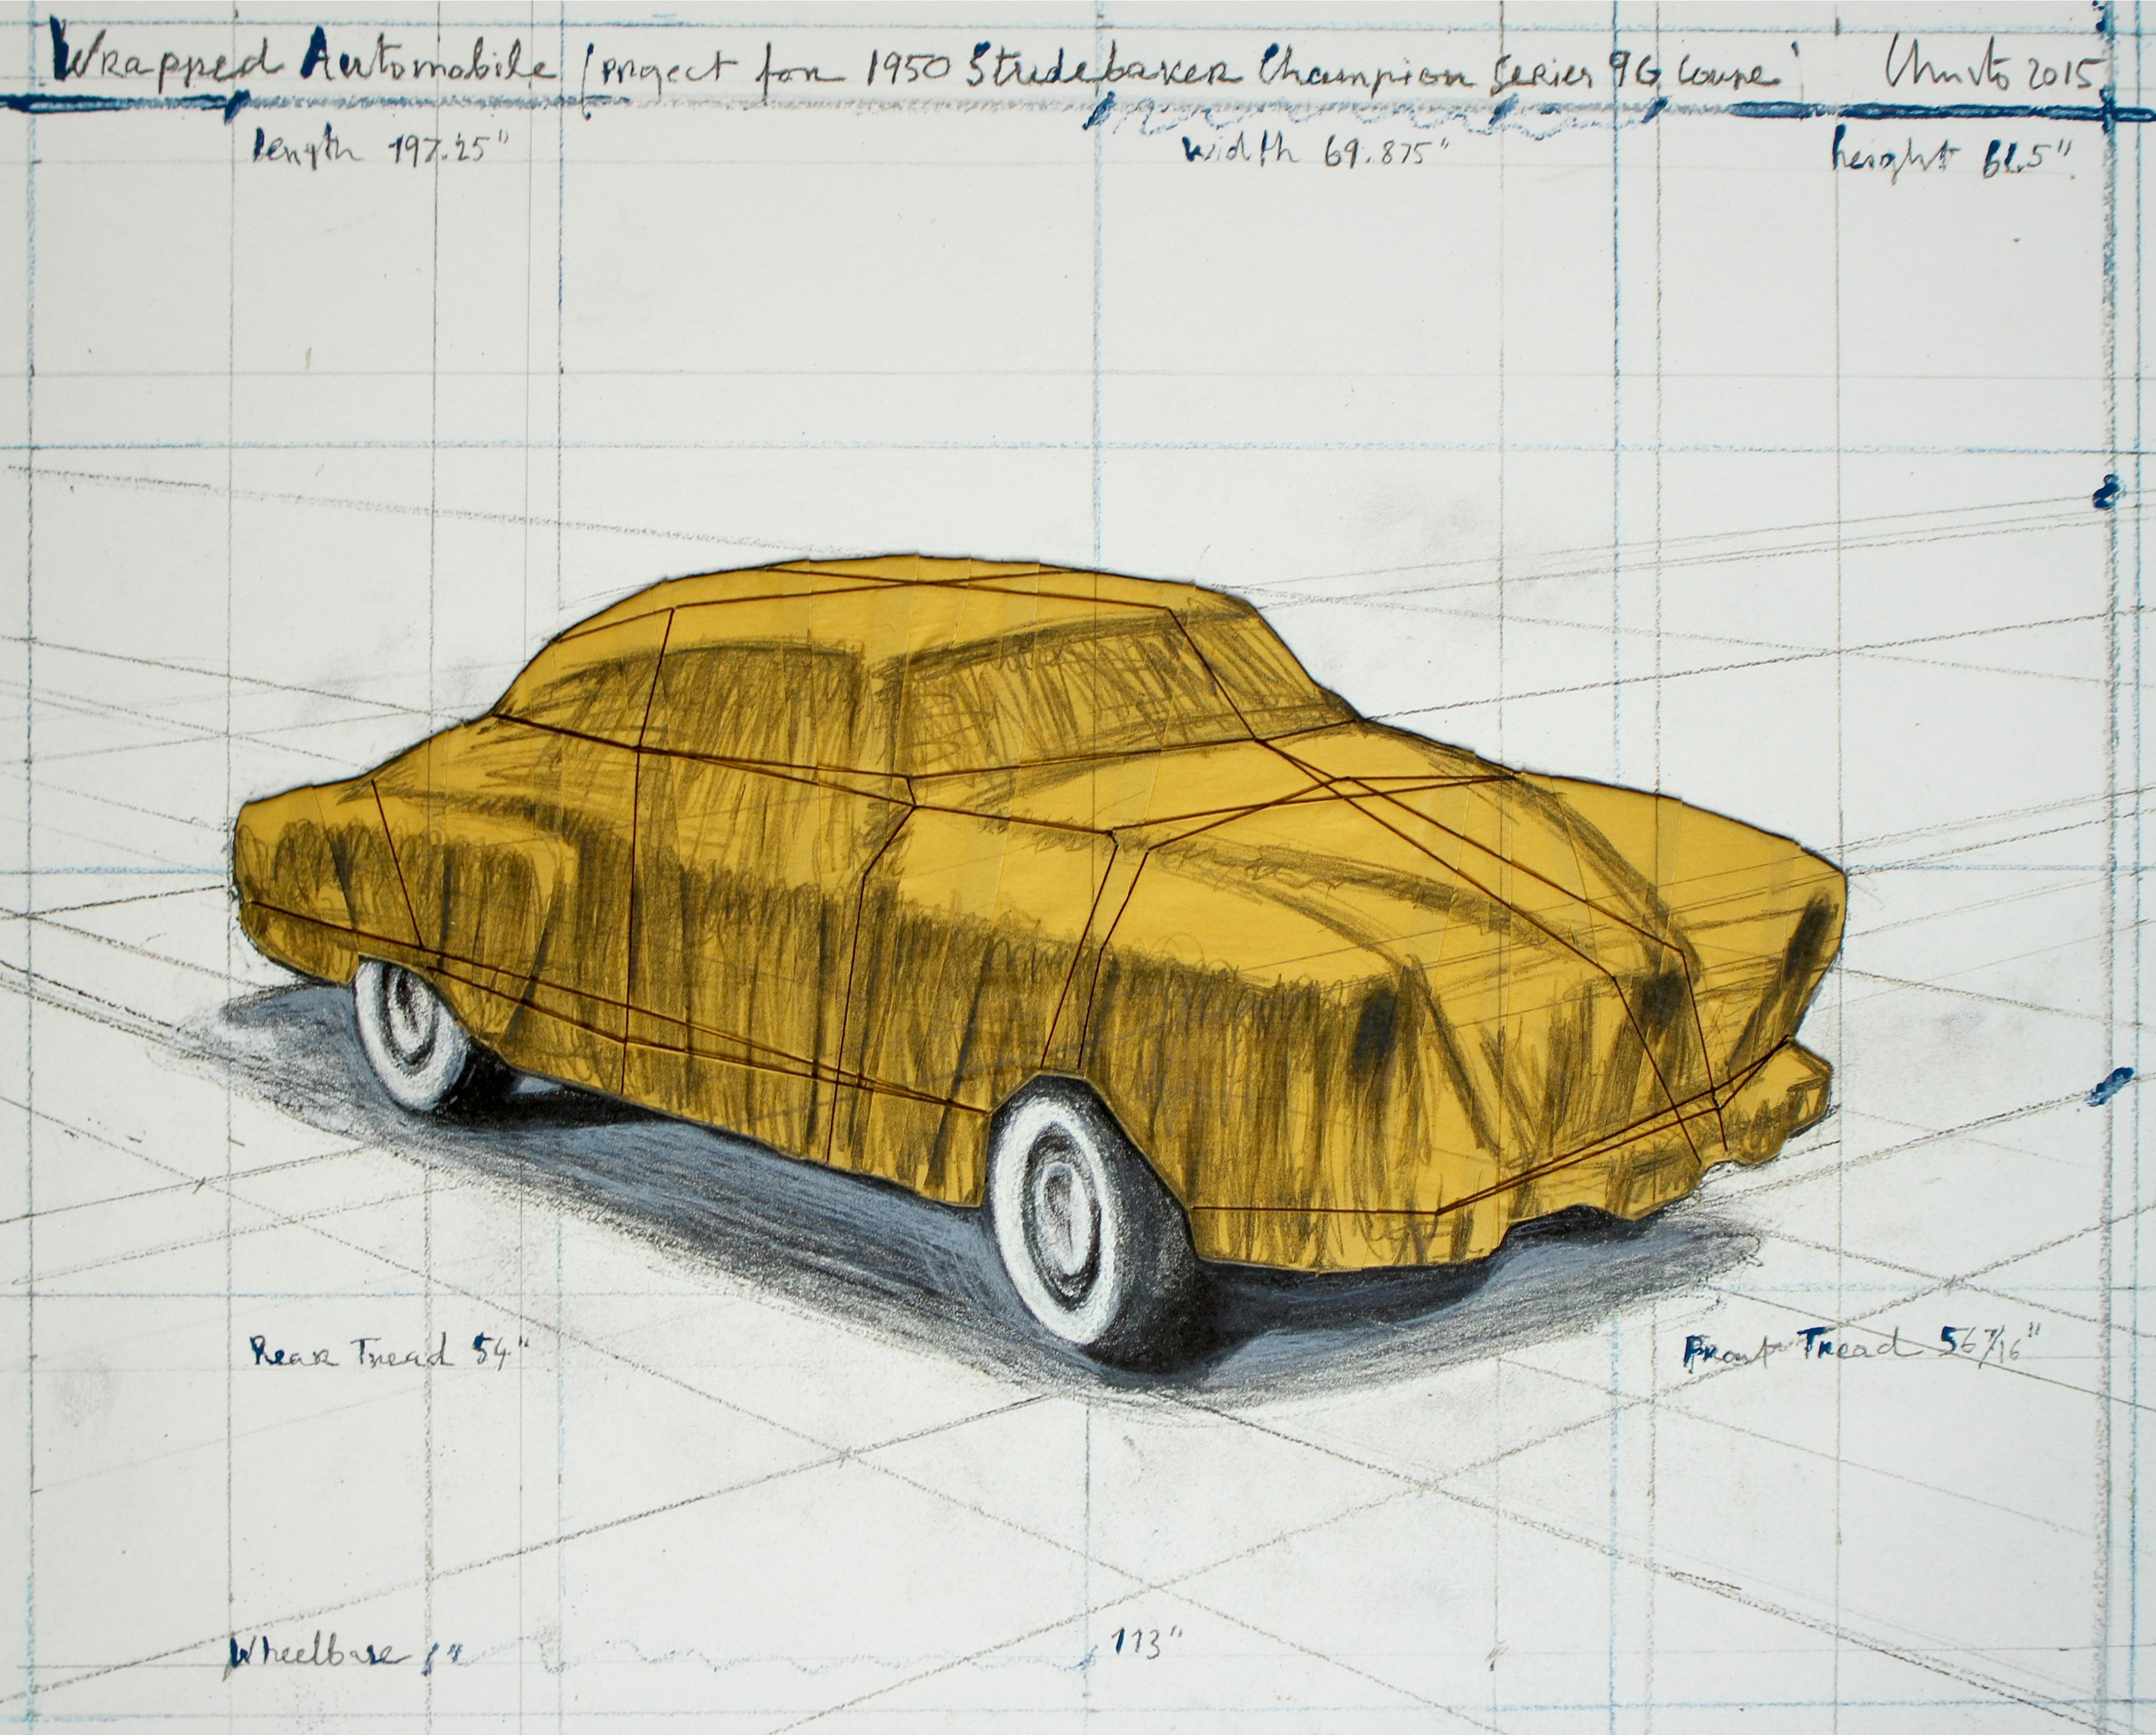 Christo and Jeanne-Claude Figurative Print - Wrapped Automobile (Project for 1950 Studebaker Champion, Series 9 G Coupe)